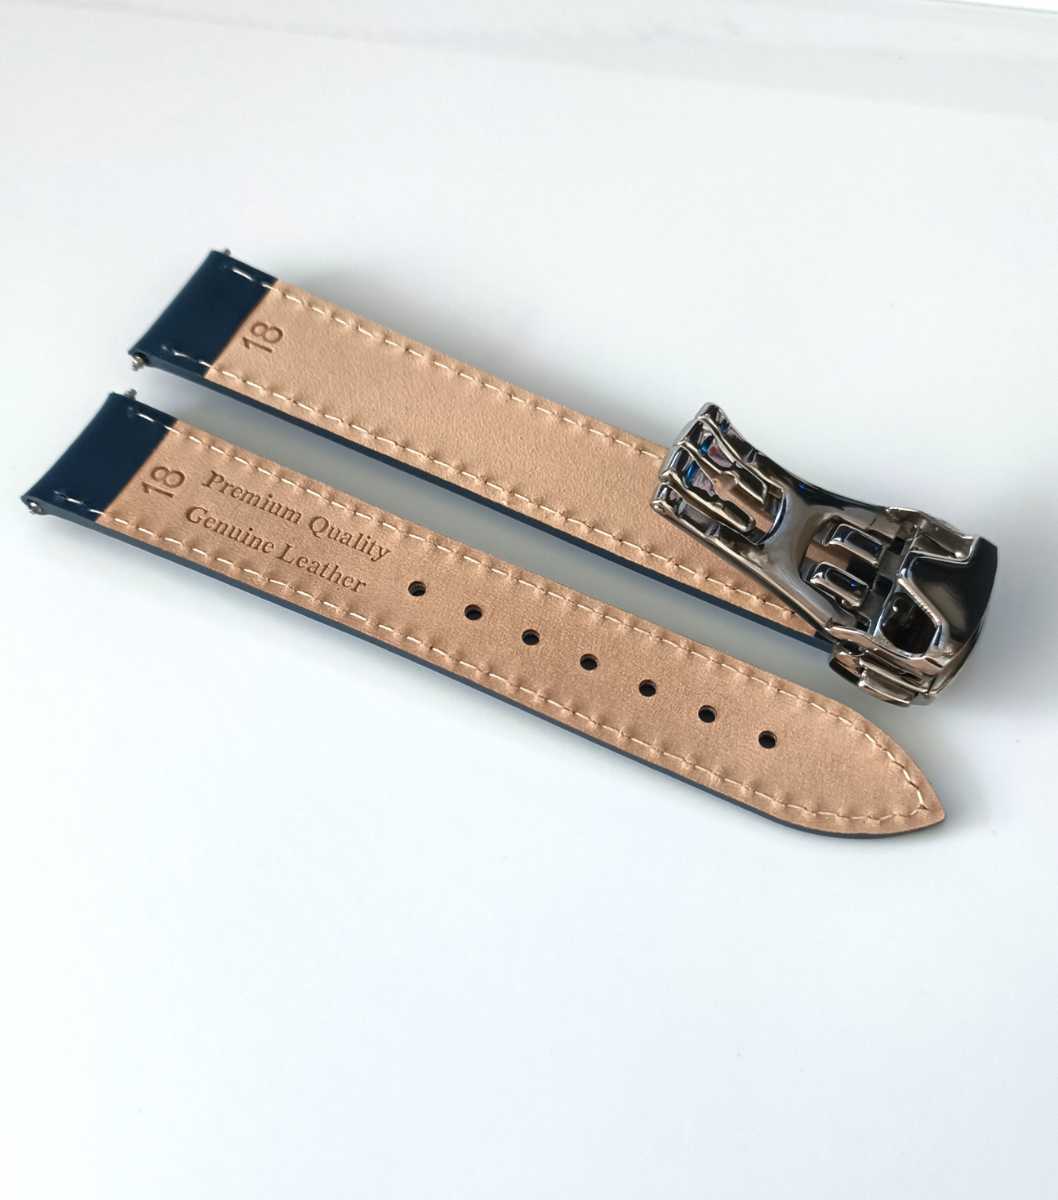 18mm wristwatch for exchange leather leather belt smooth navy blue × white D buckle [ correspondence ] Omega Speedmaster / Seamaster etc. 